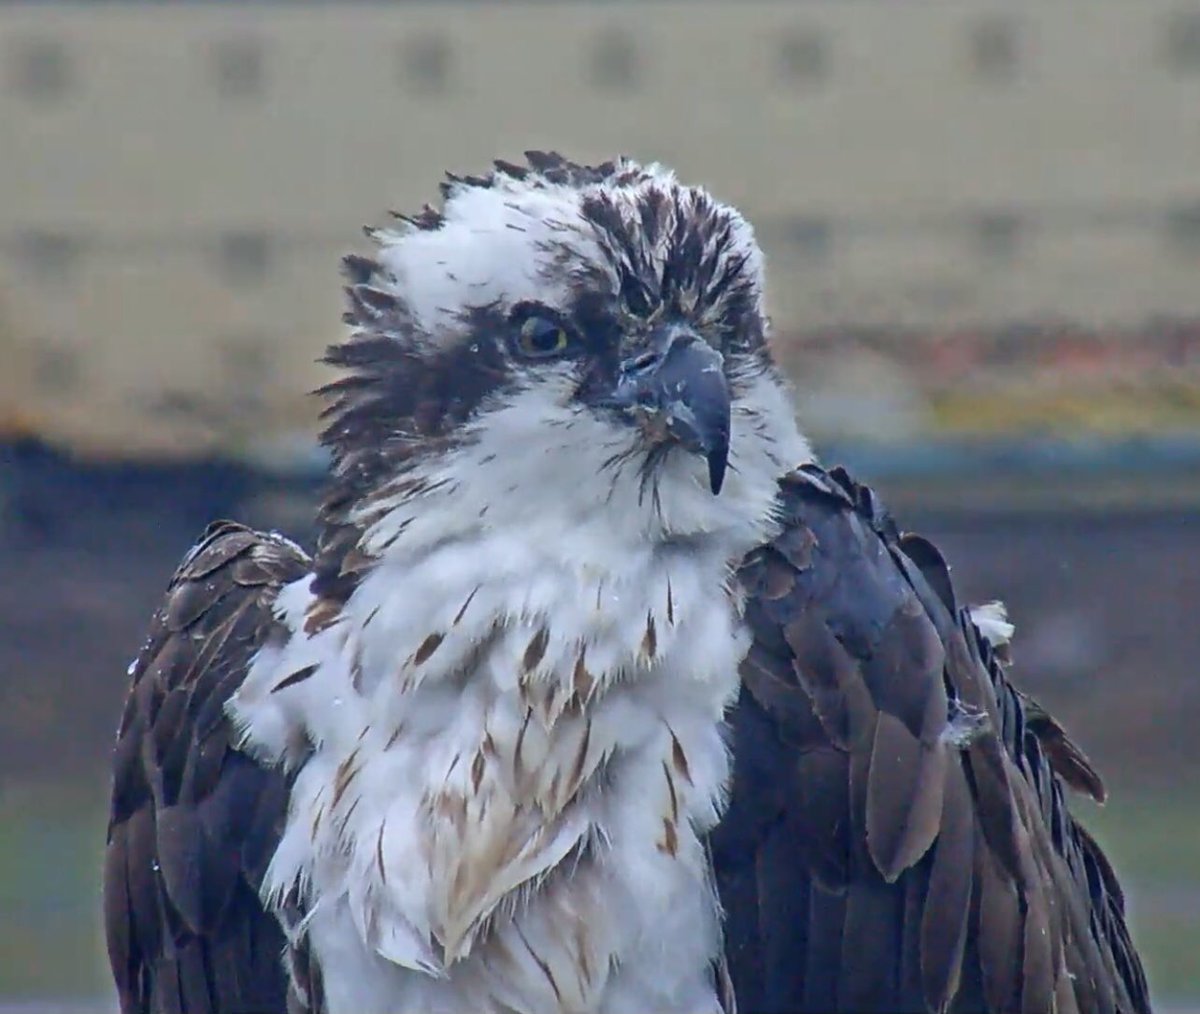 @HellgateOsprey What a wonderful way to start my day, looking at this glorious Osprey! Long live Queen Iris!! Enjoy your weekend #chows #beaniris #cornellbirds